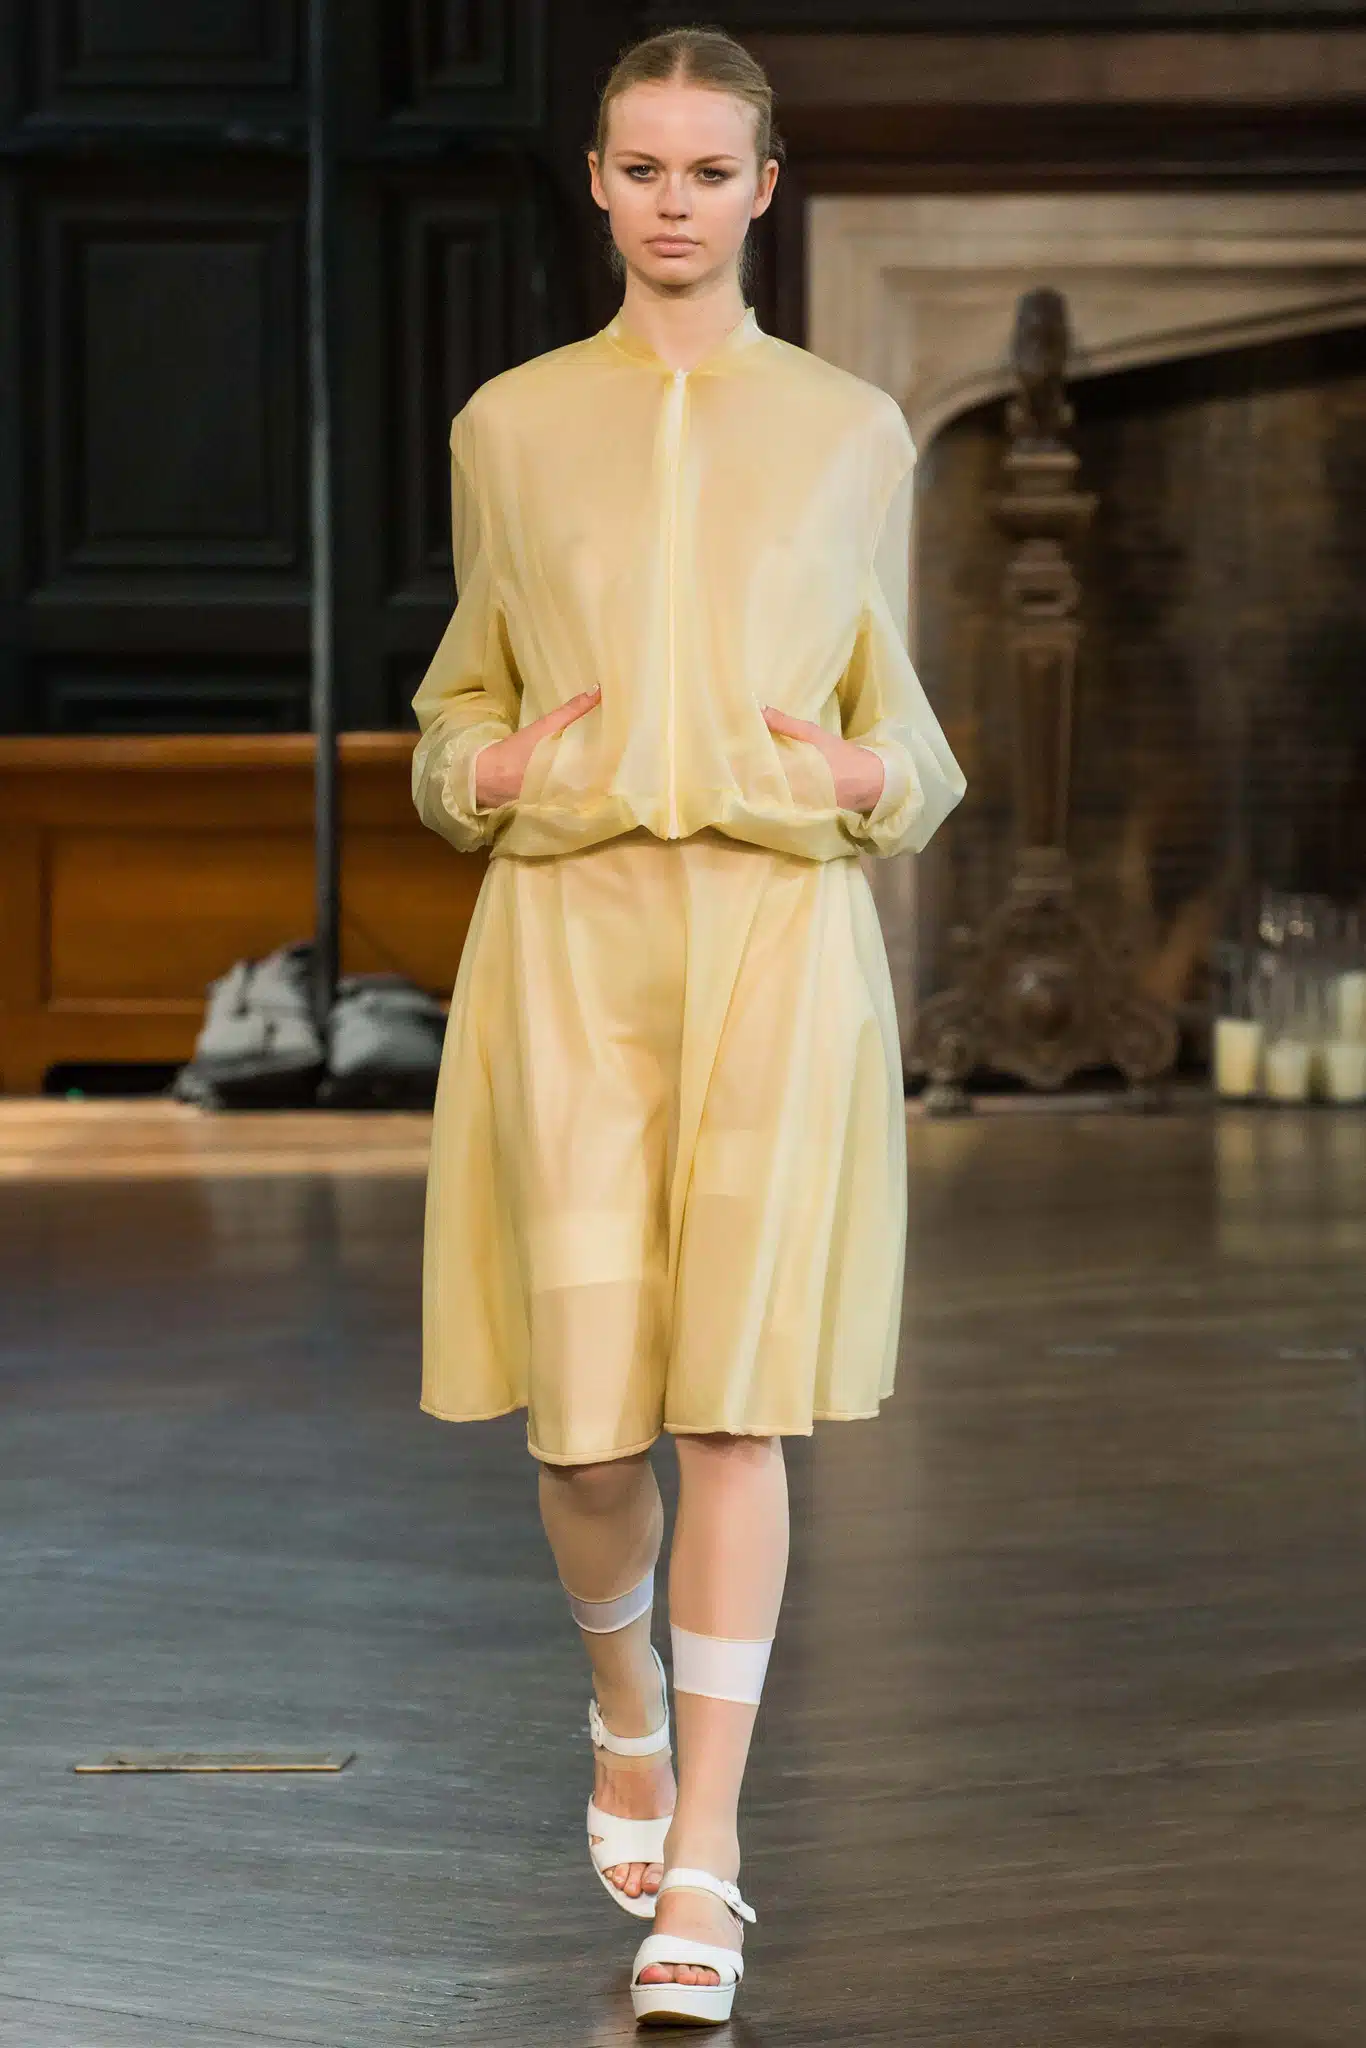 Image from SS15 SHOW Collection